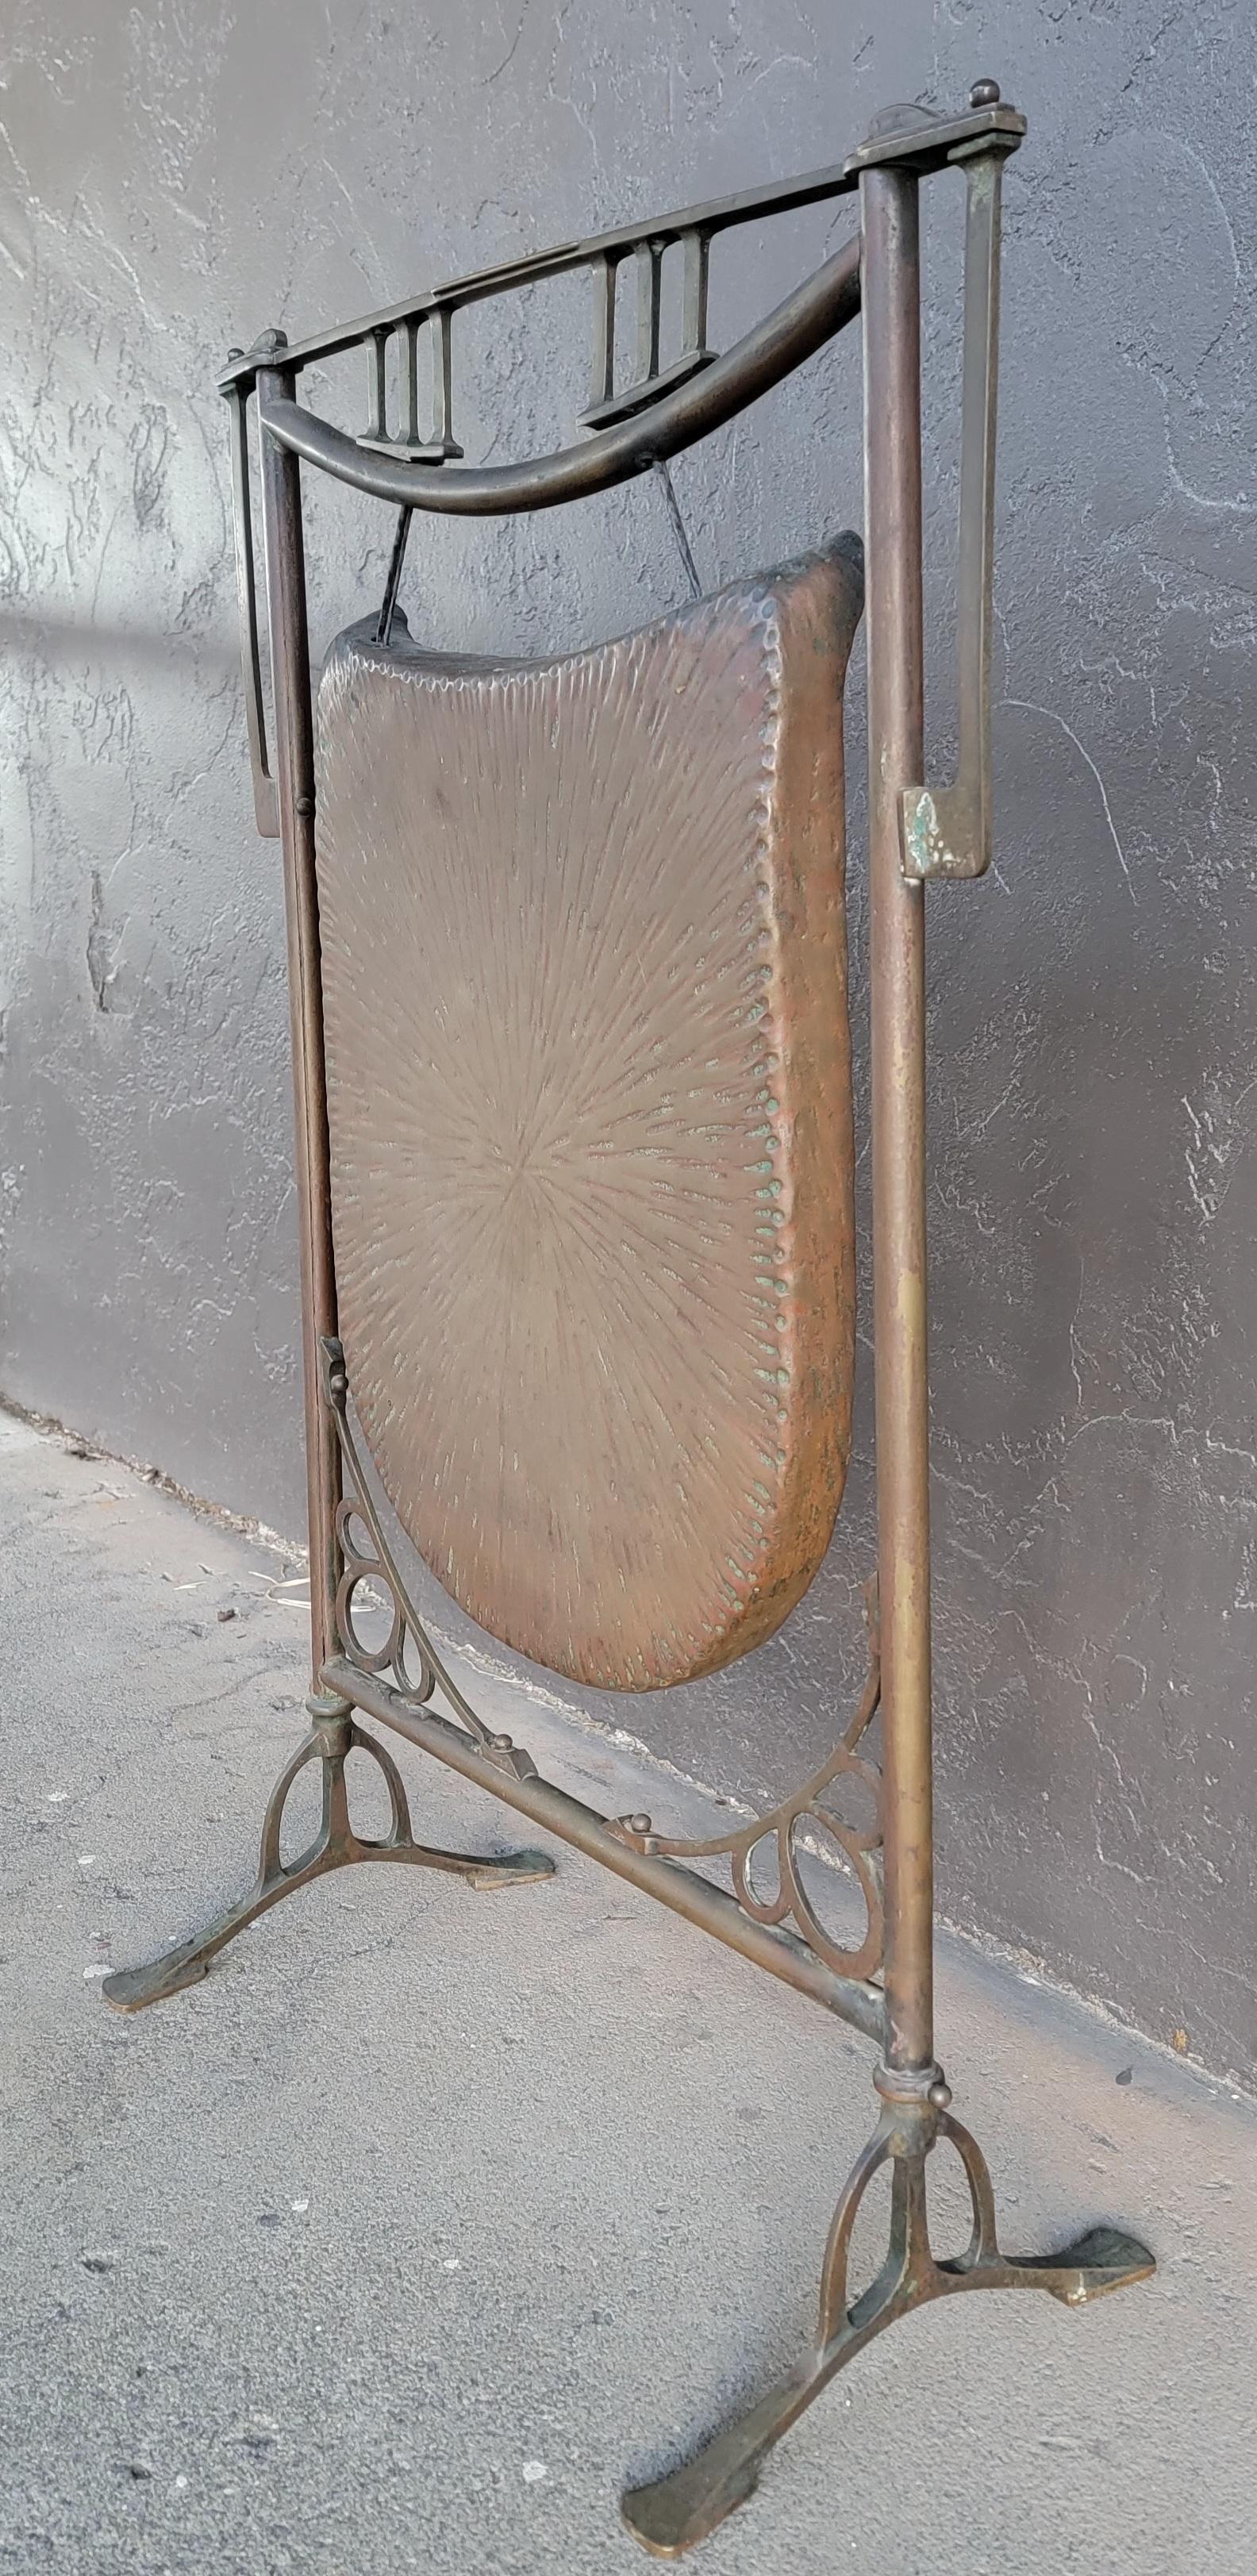 Art Nouveau Gong Brass & Hammered Copper In Good Condition For Sale In Fulton, CA